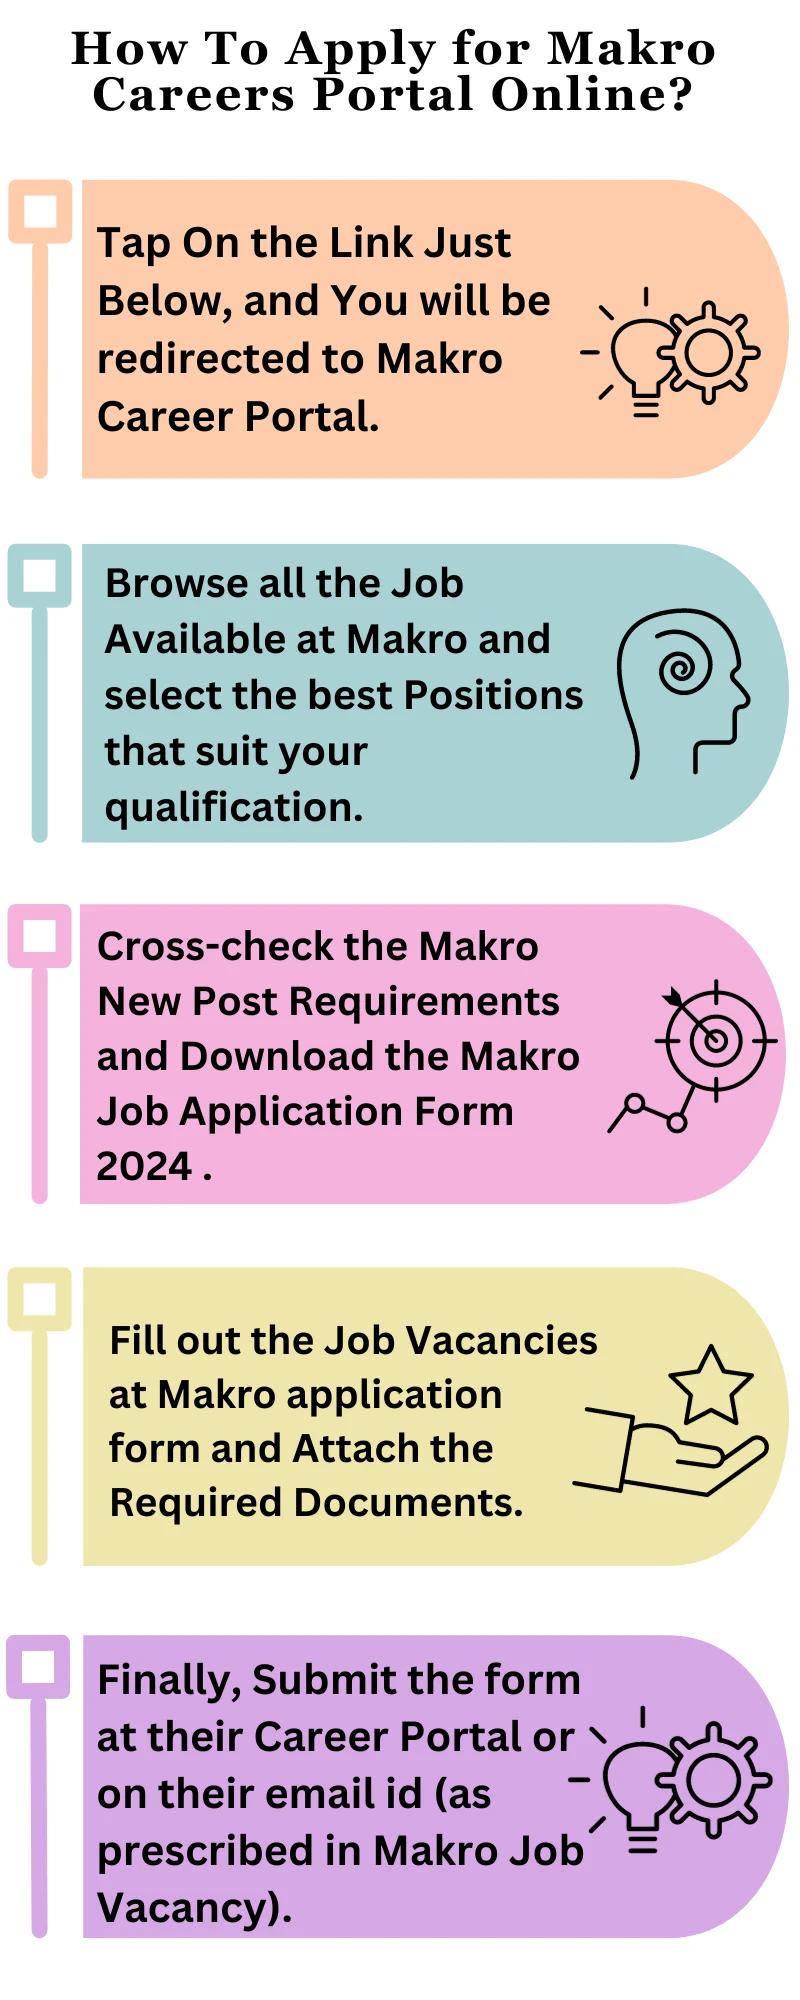 How To Apply for Makro Careers Portal Online?